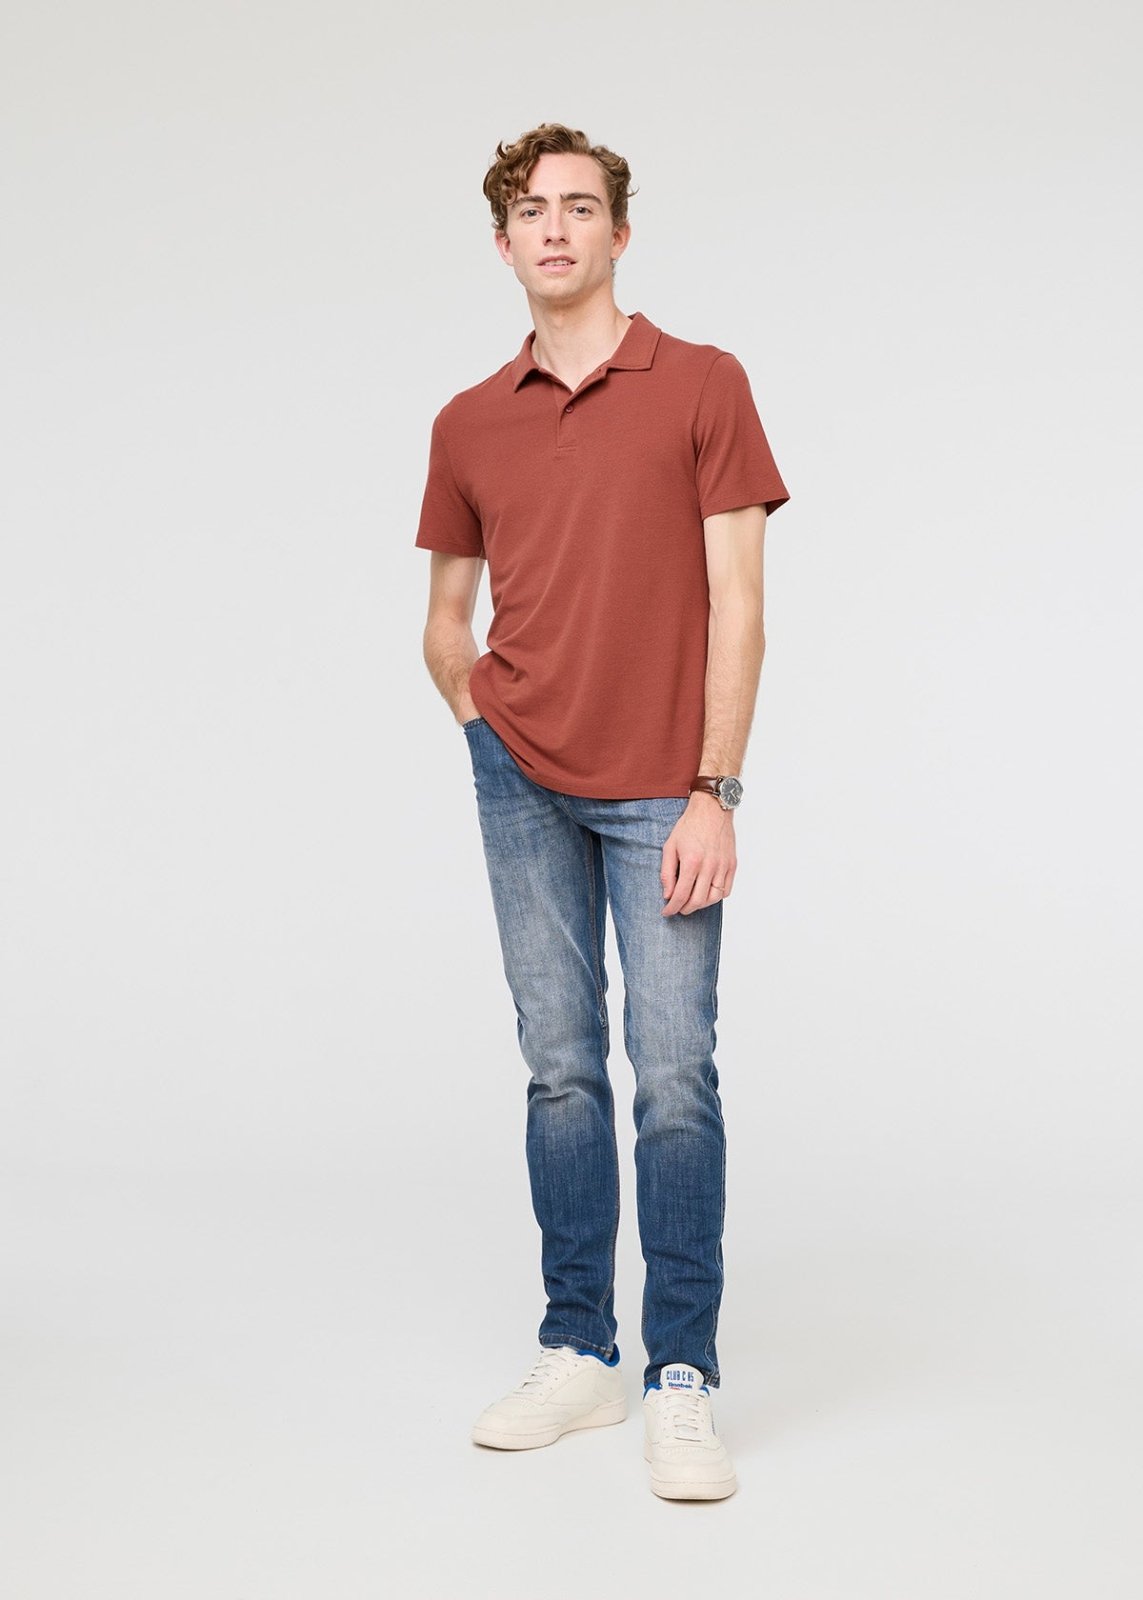 mens breathable red polo full body